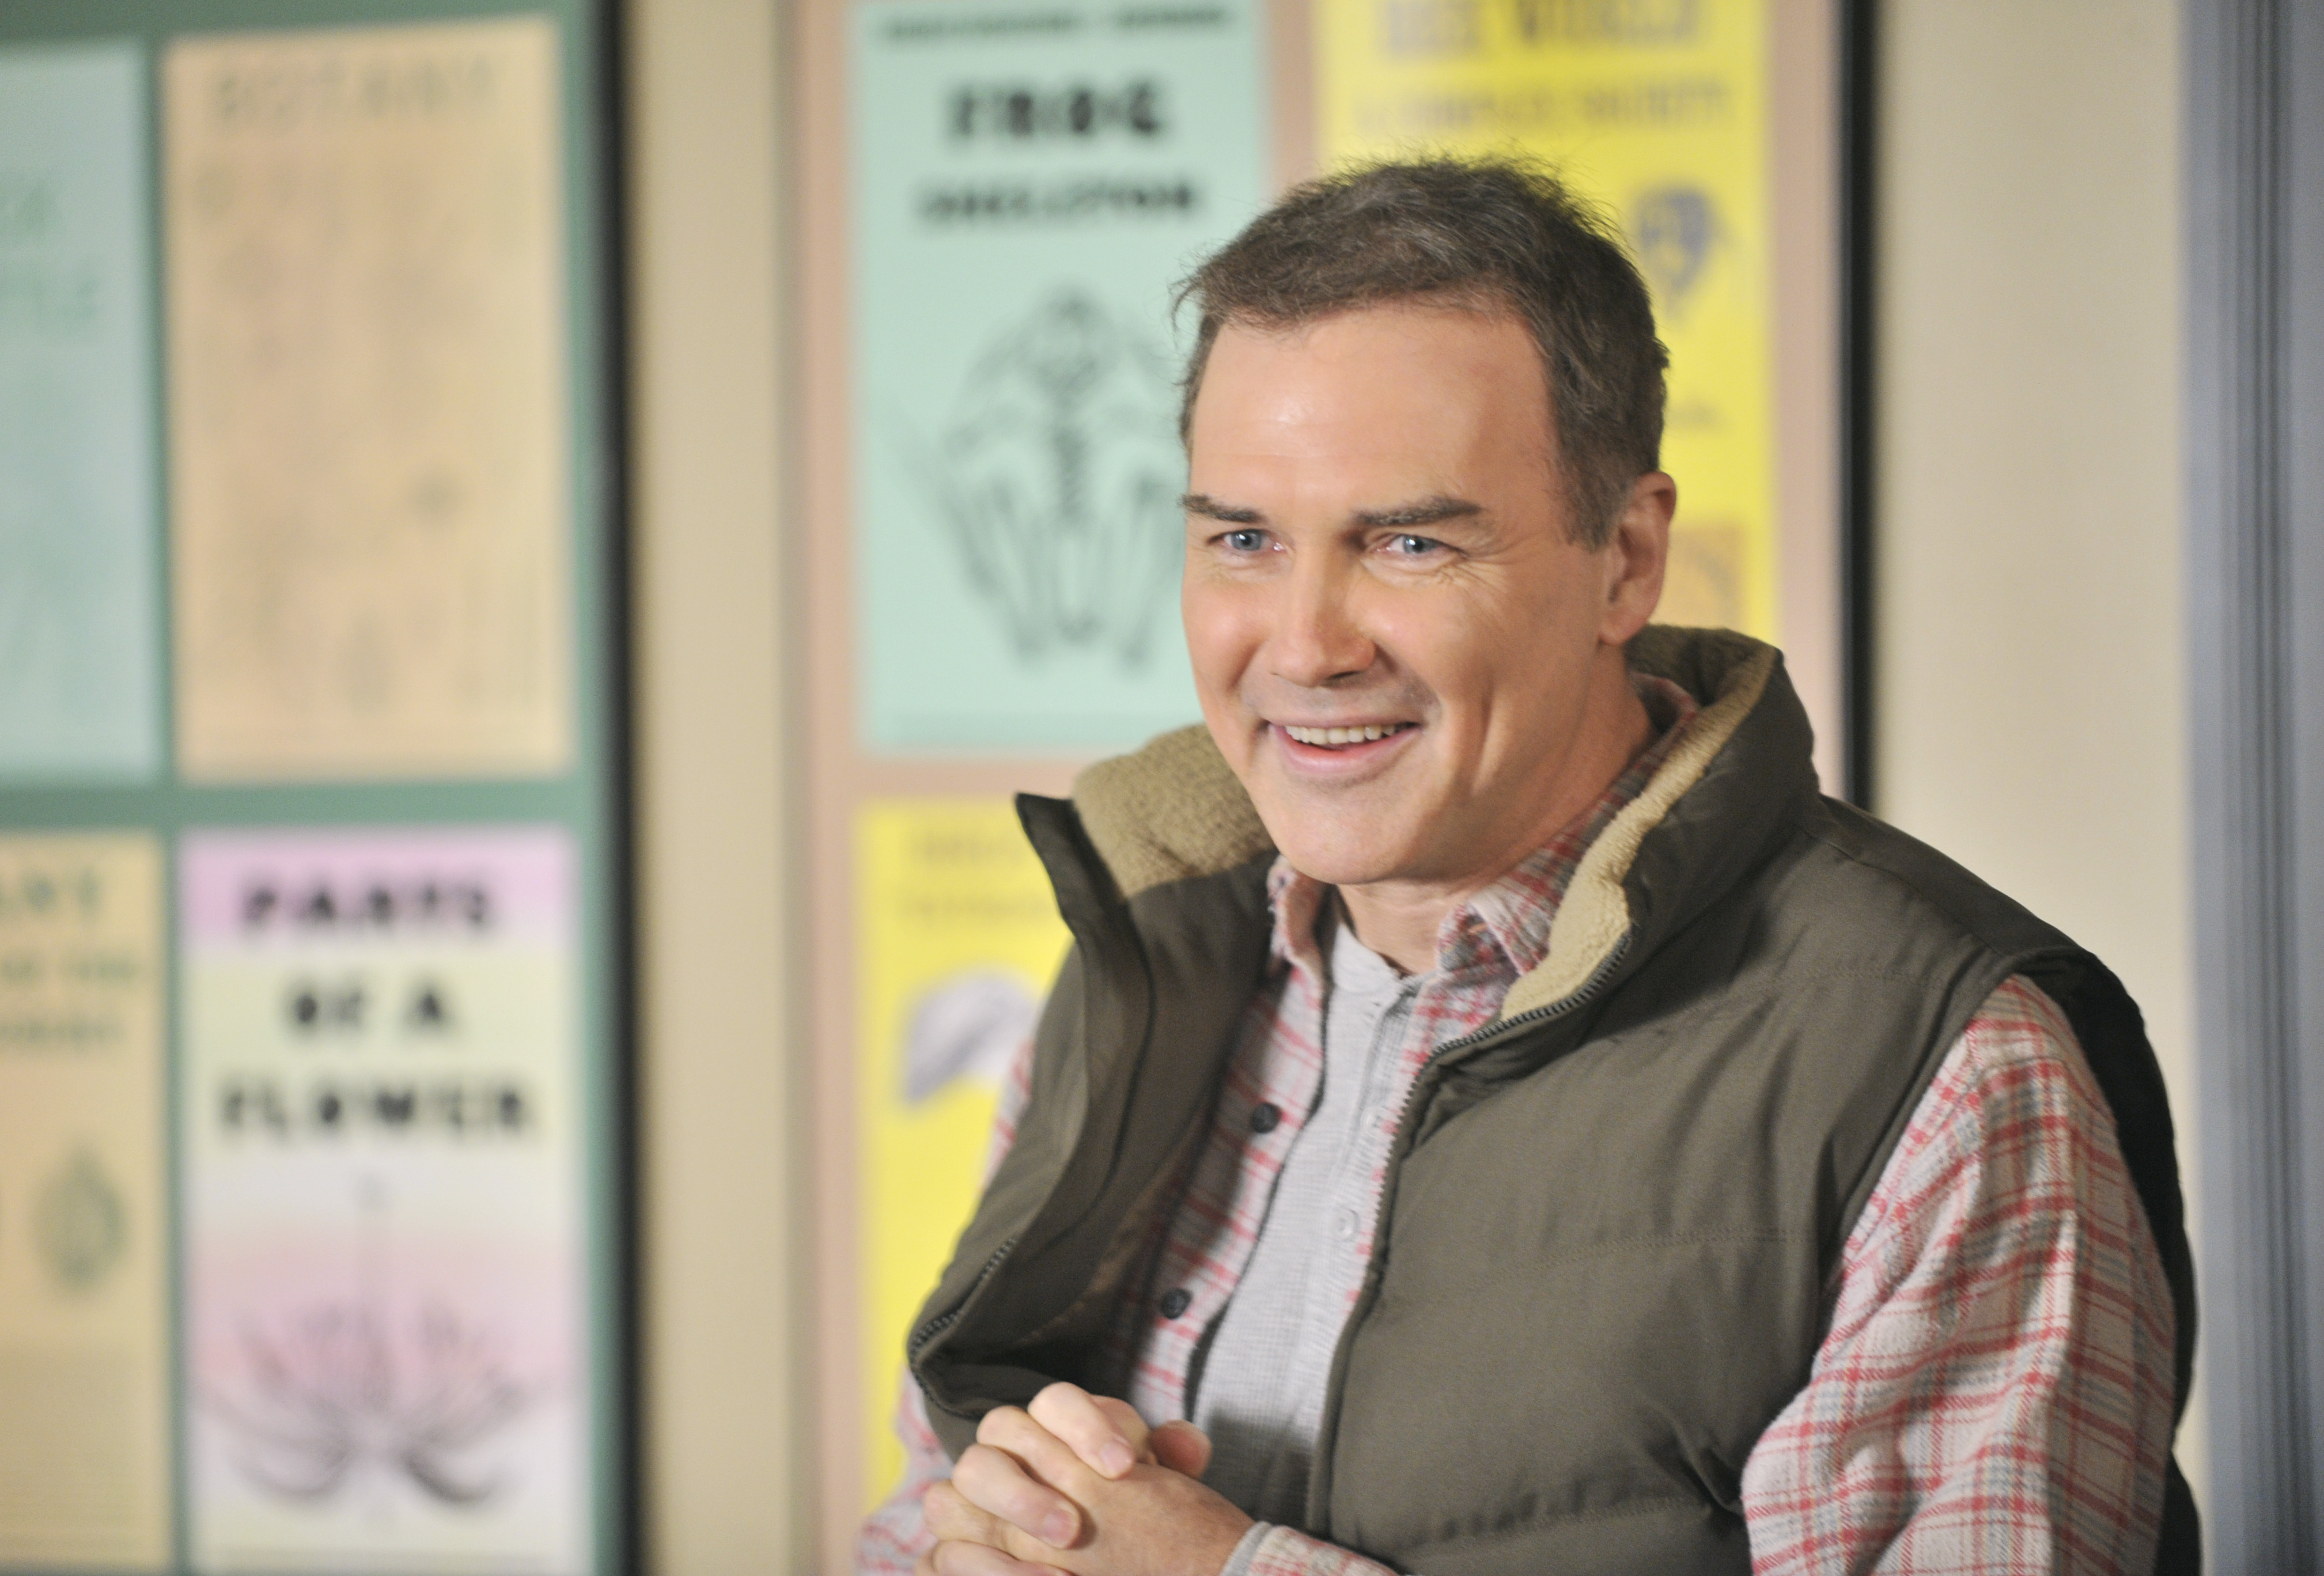 Norm Macdonald on season three of "The Middle" on October 26, 2011 | Source: Getty Images